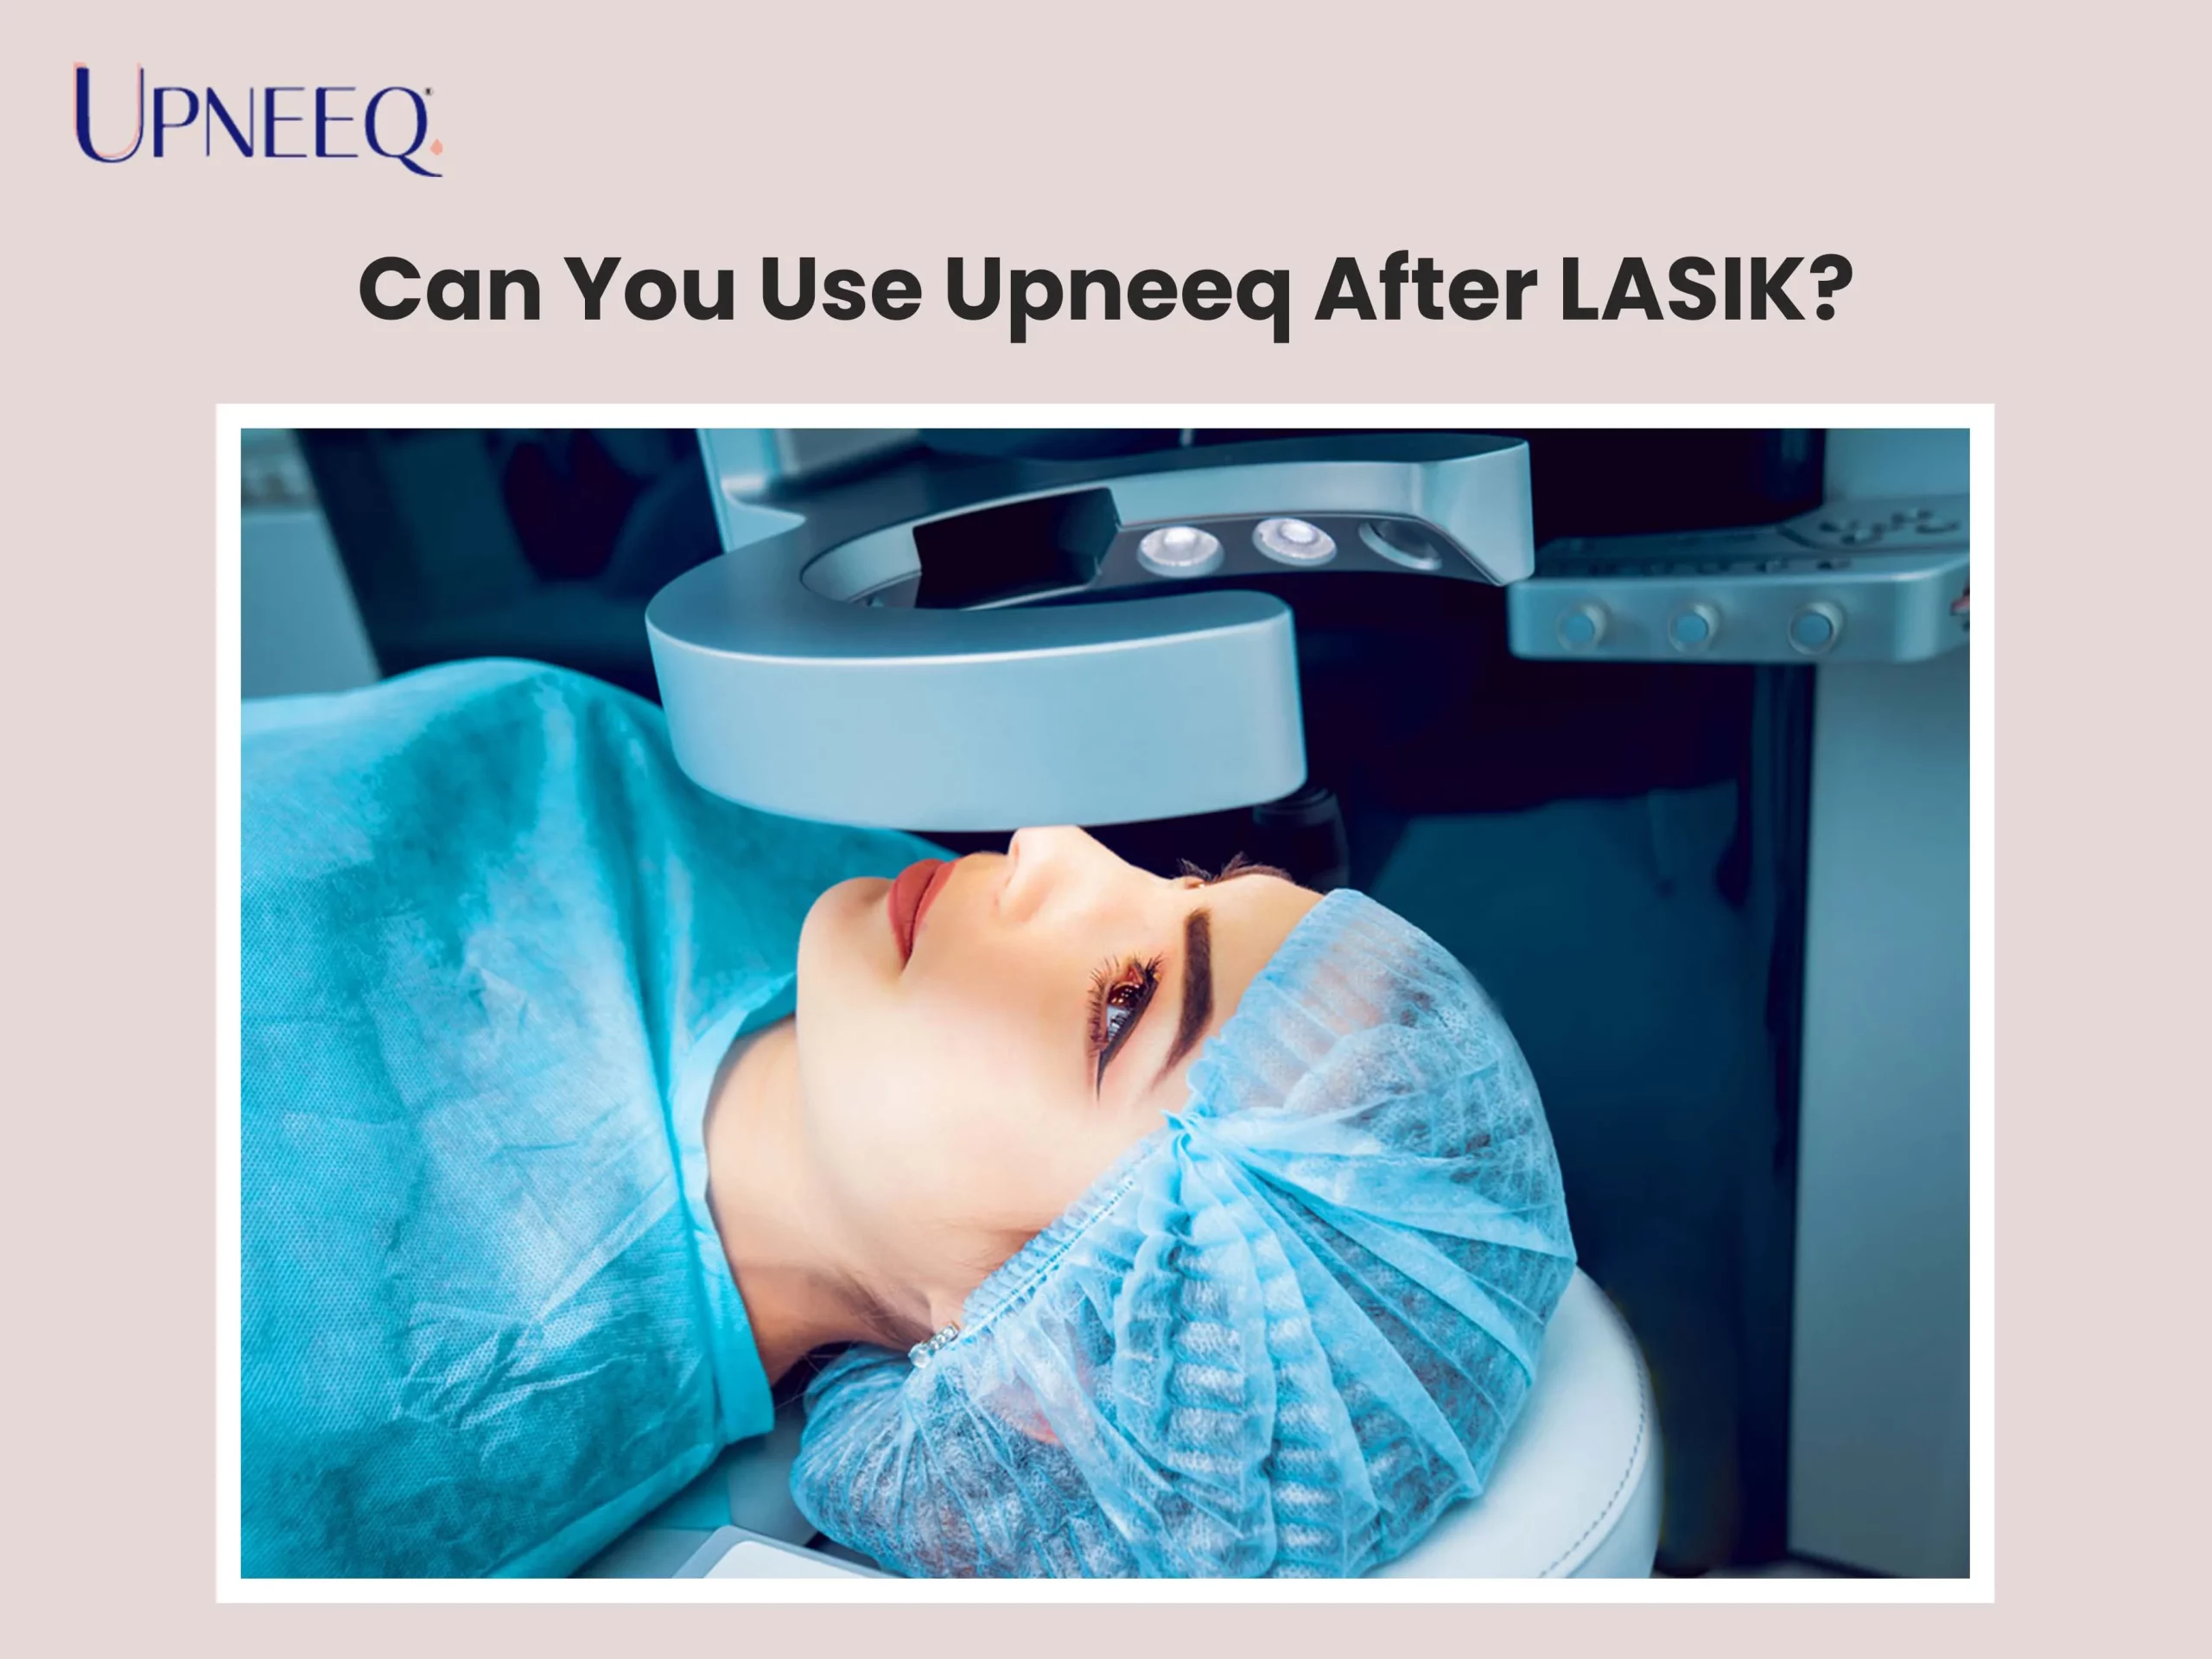 Can You Use Upneeq After LASIK?